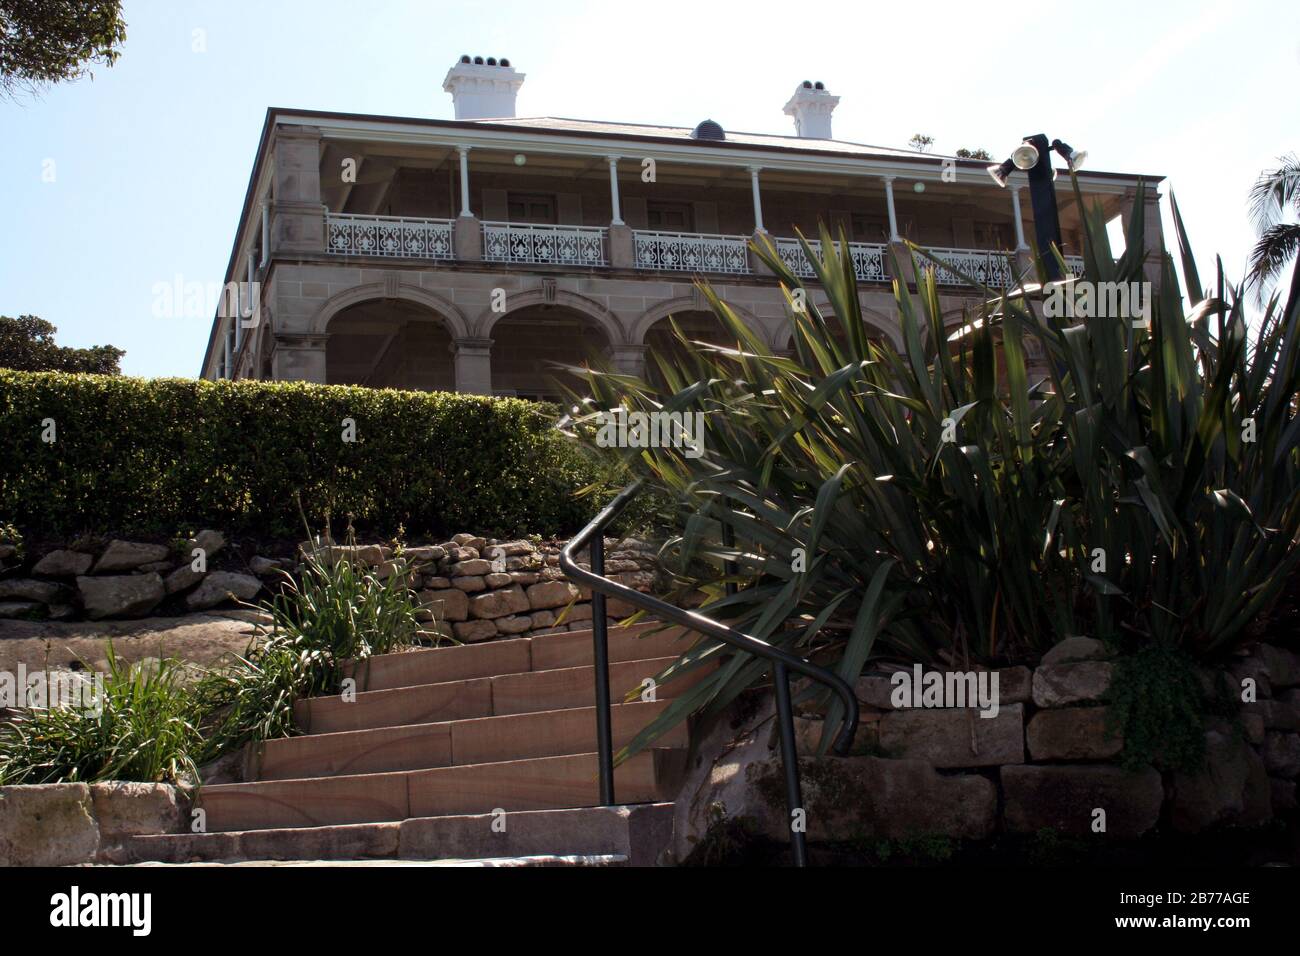 ADMIRALTY HOUSE IS THE OFFICIAL RESIDENCE OF THE GOVERNOR GENERAL OF AUSTRALIA. LOCATED IN THE HARBOURSIDE SUBURB OF KIRRIBILLI, NEW SOUTH WALES. Stock Photo